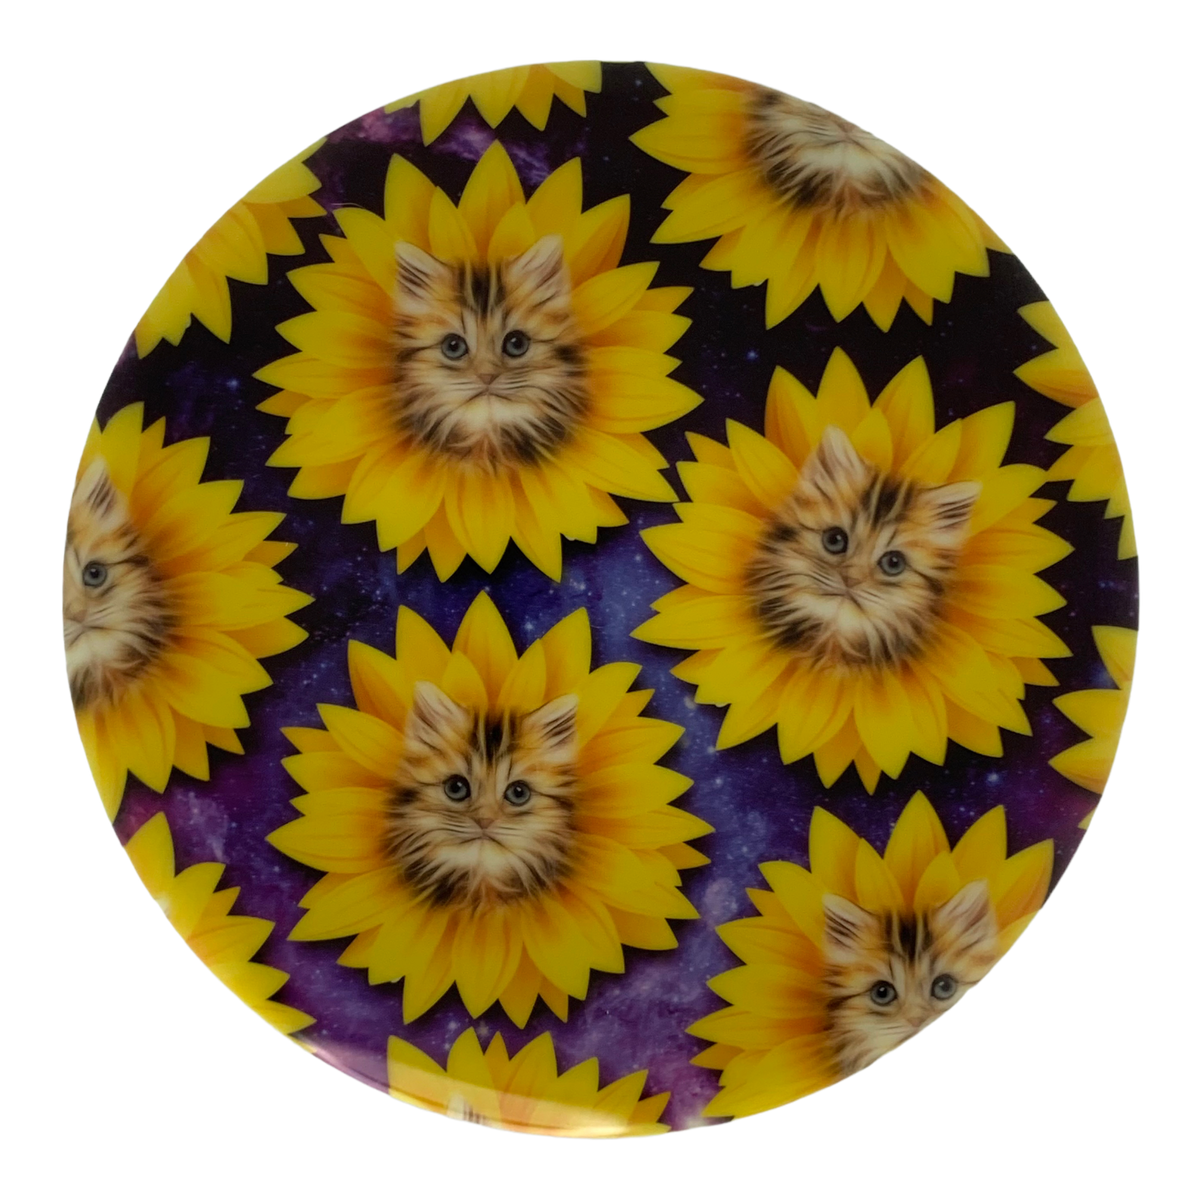 Dynamic Discs Fuzion DyeMax Emac Truth - Space Kitty Sunflowers